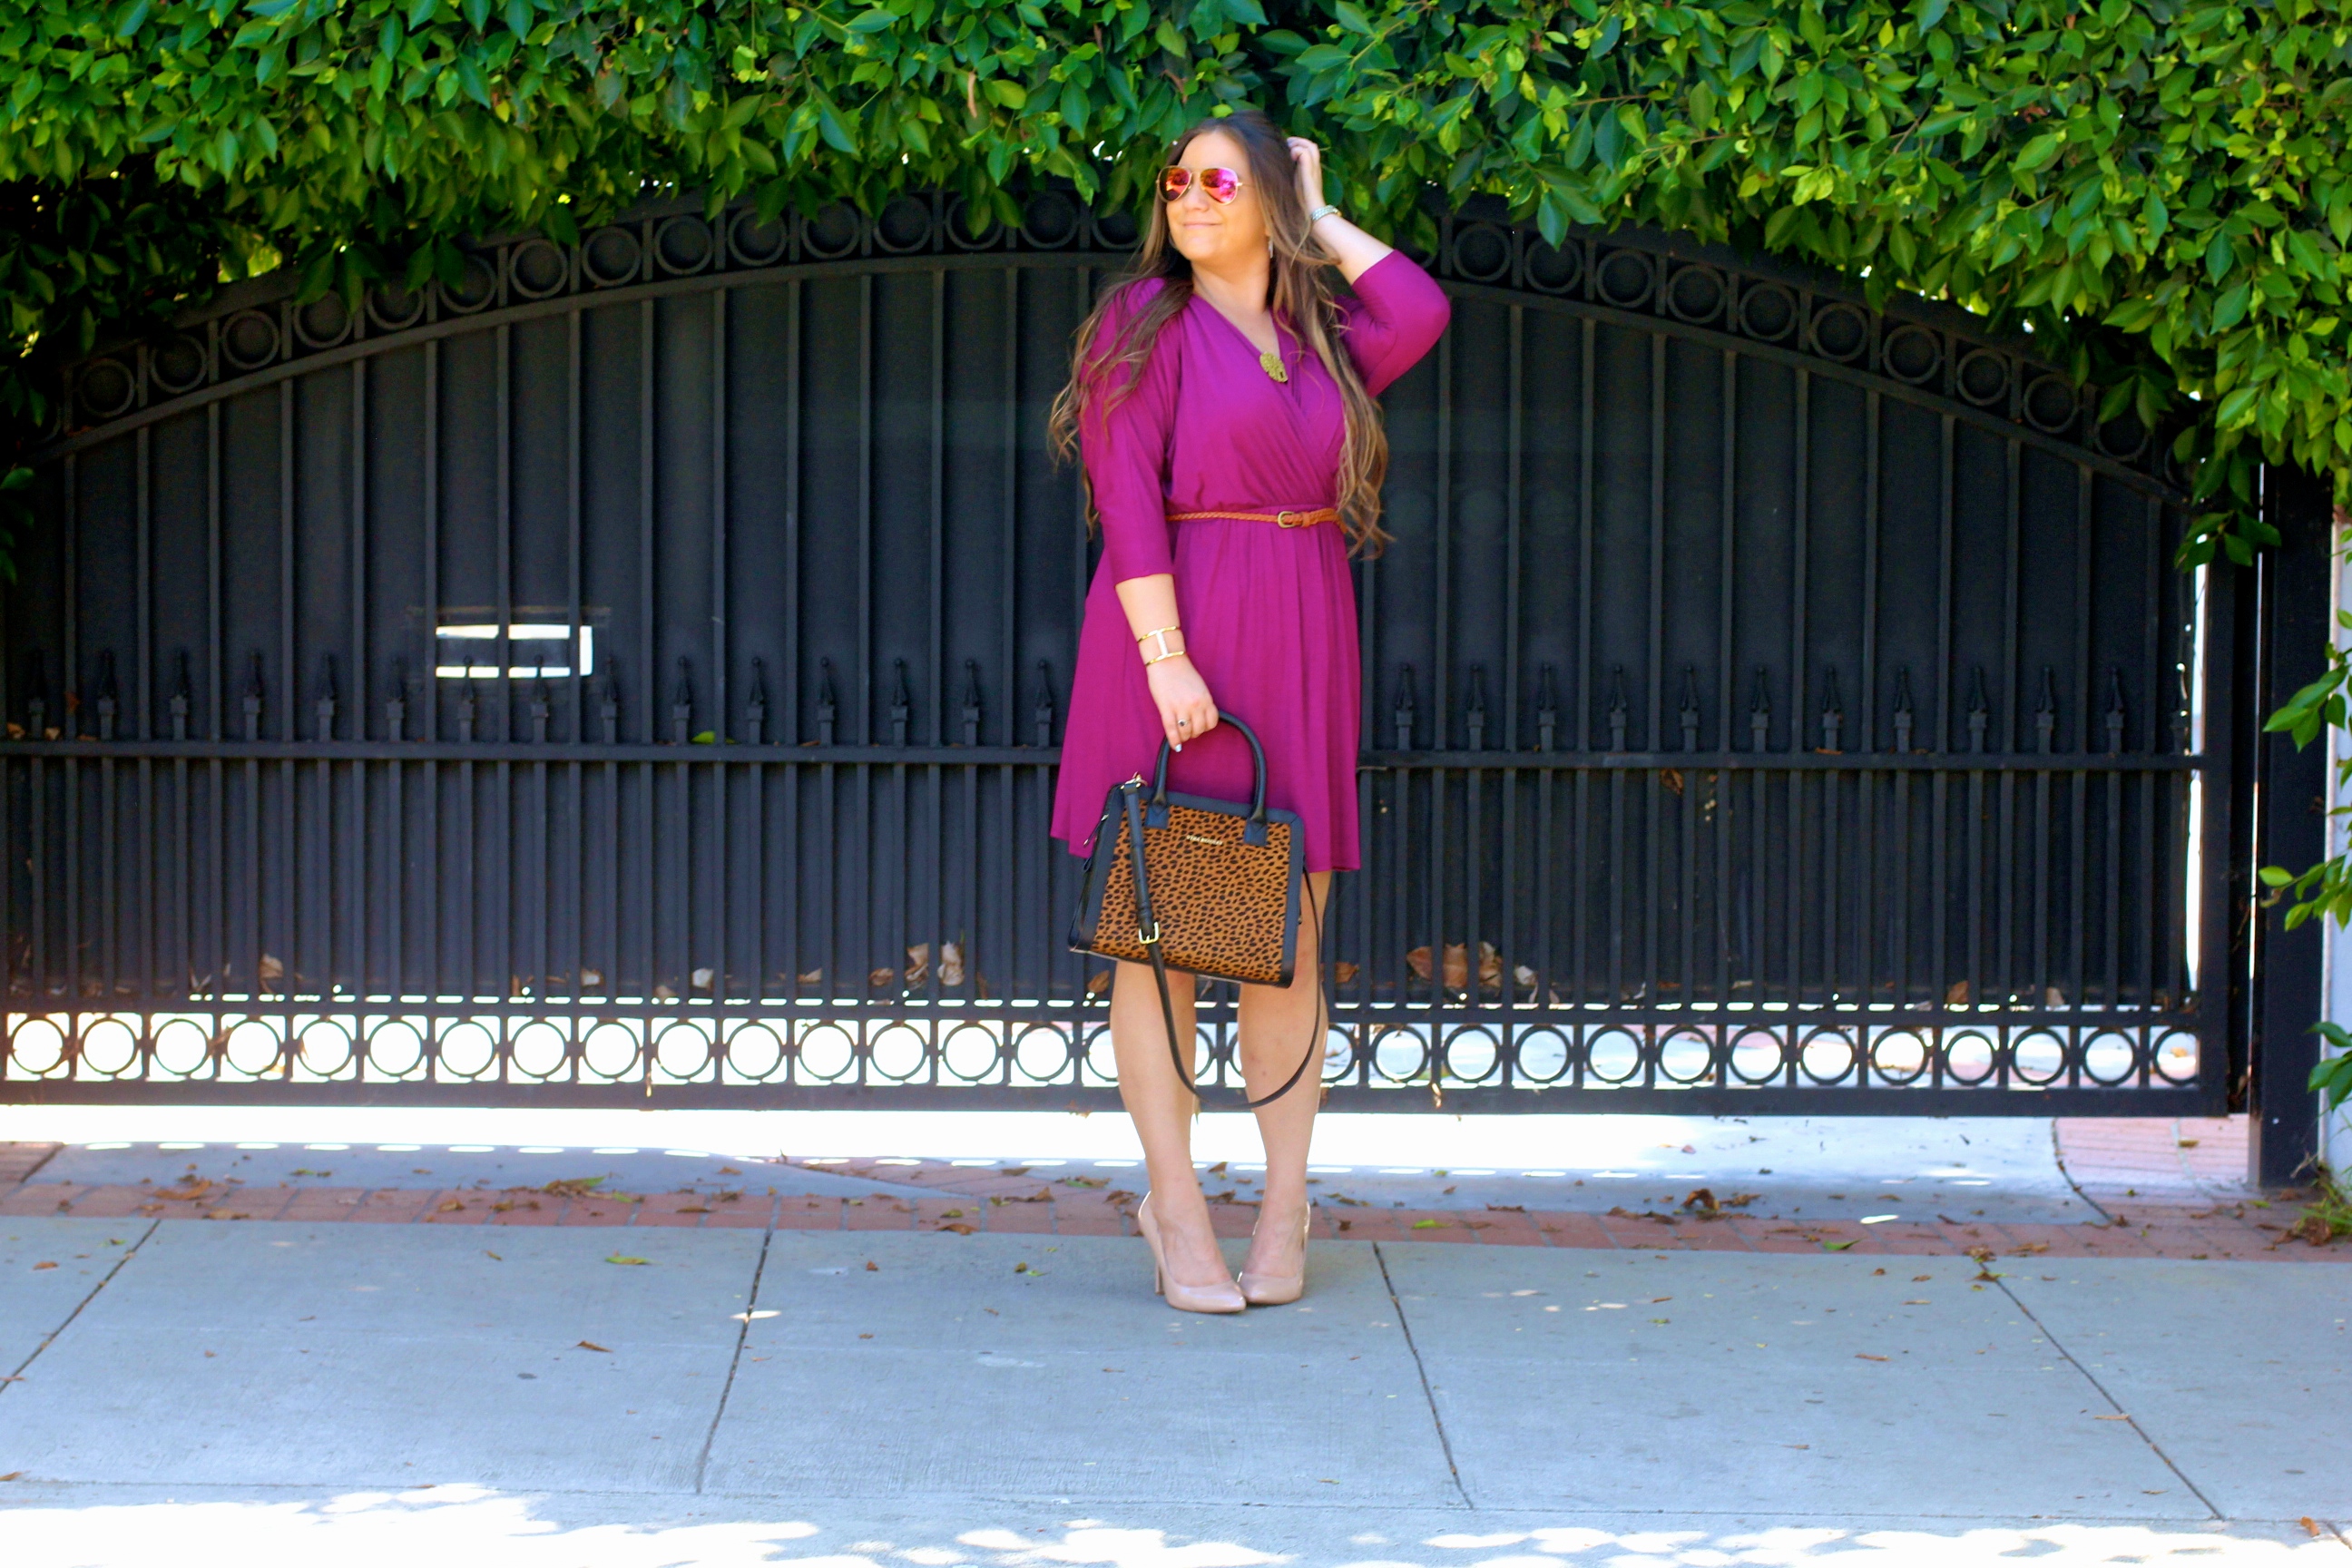 missyonmadison, melissa tierney, fashion blog, fashion blogger, style blog, style blogger, shoot the moon la, violet wrap dress, plum wrap dress, vera bradley, vera bradley leopard satchel, leopard satchel, nude pumps, nude pointed toe pumps, dsw, mirrored aviators, red aviators, baublebar monogram necklace, wrap dress, long sleeve wrap dress, holiday style, what to wear for the holidays, how to dress for work, la blogger, violet wrap dress,